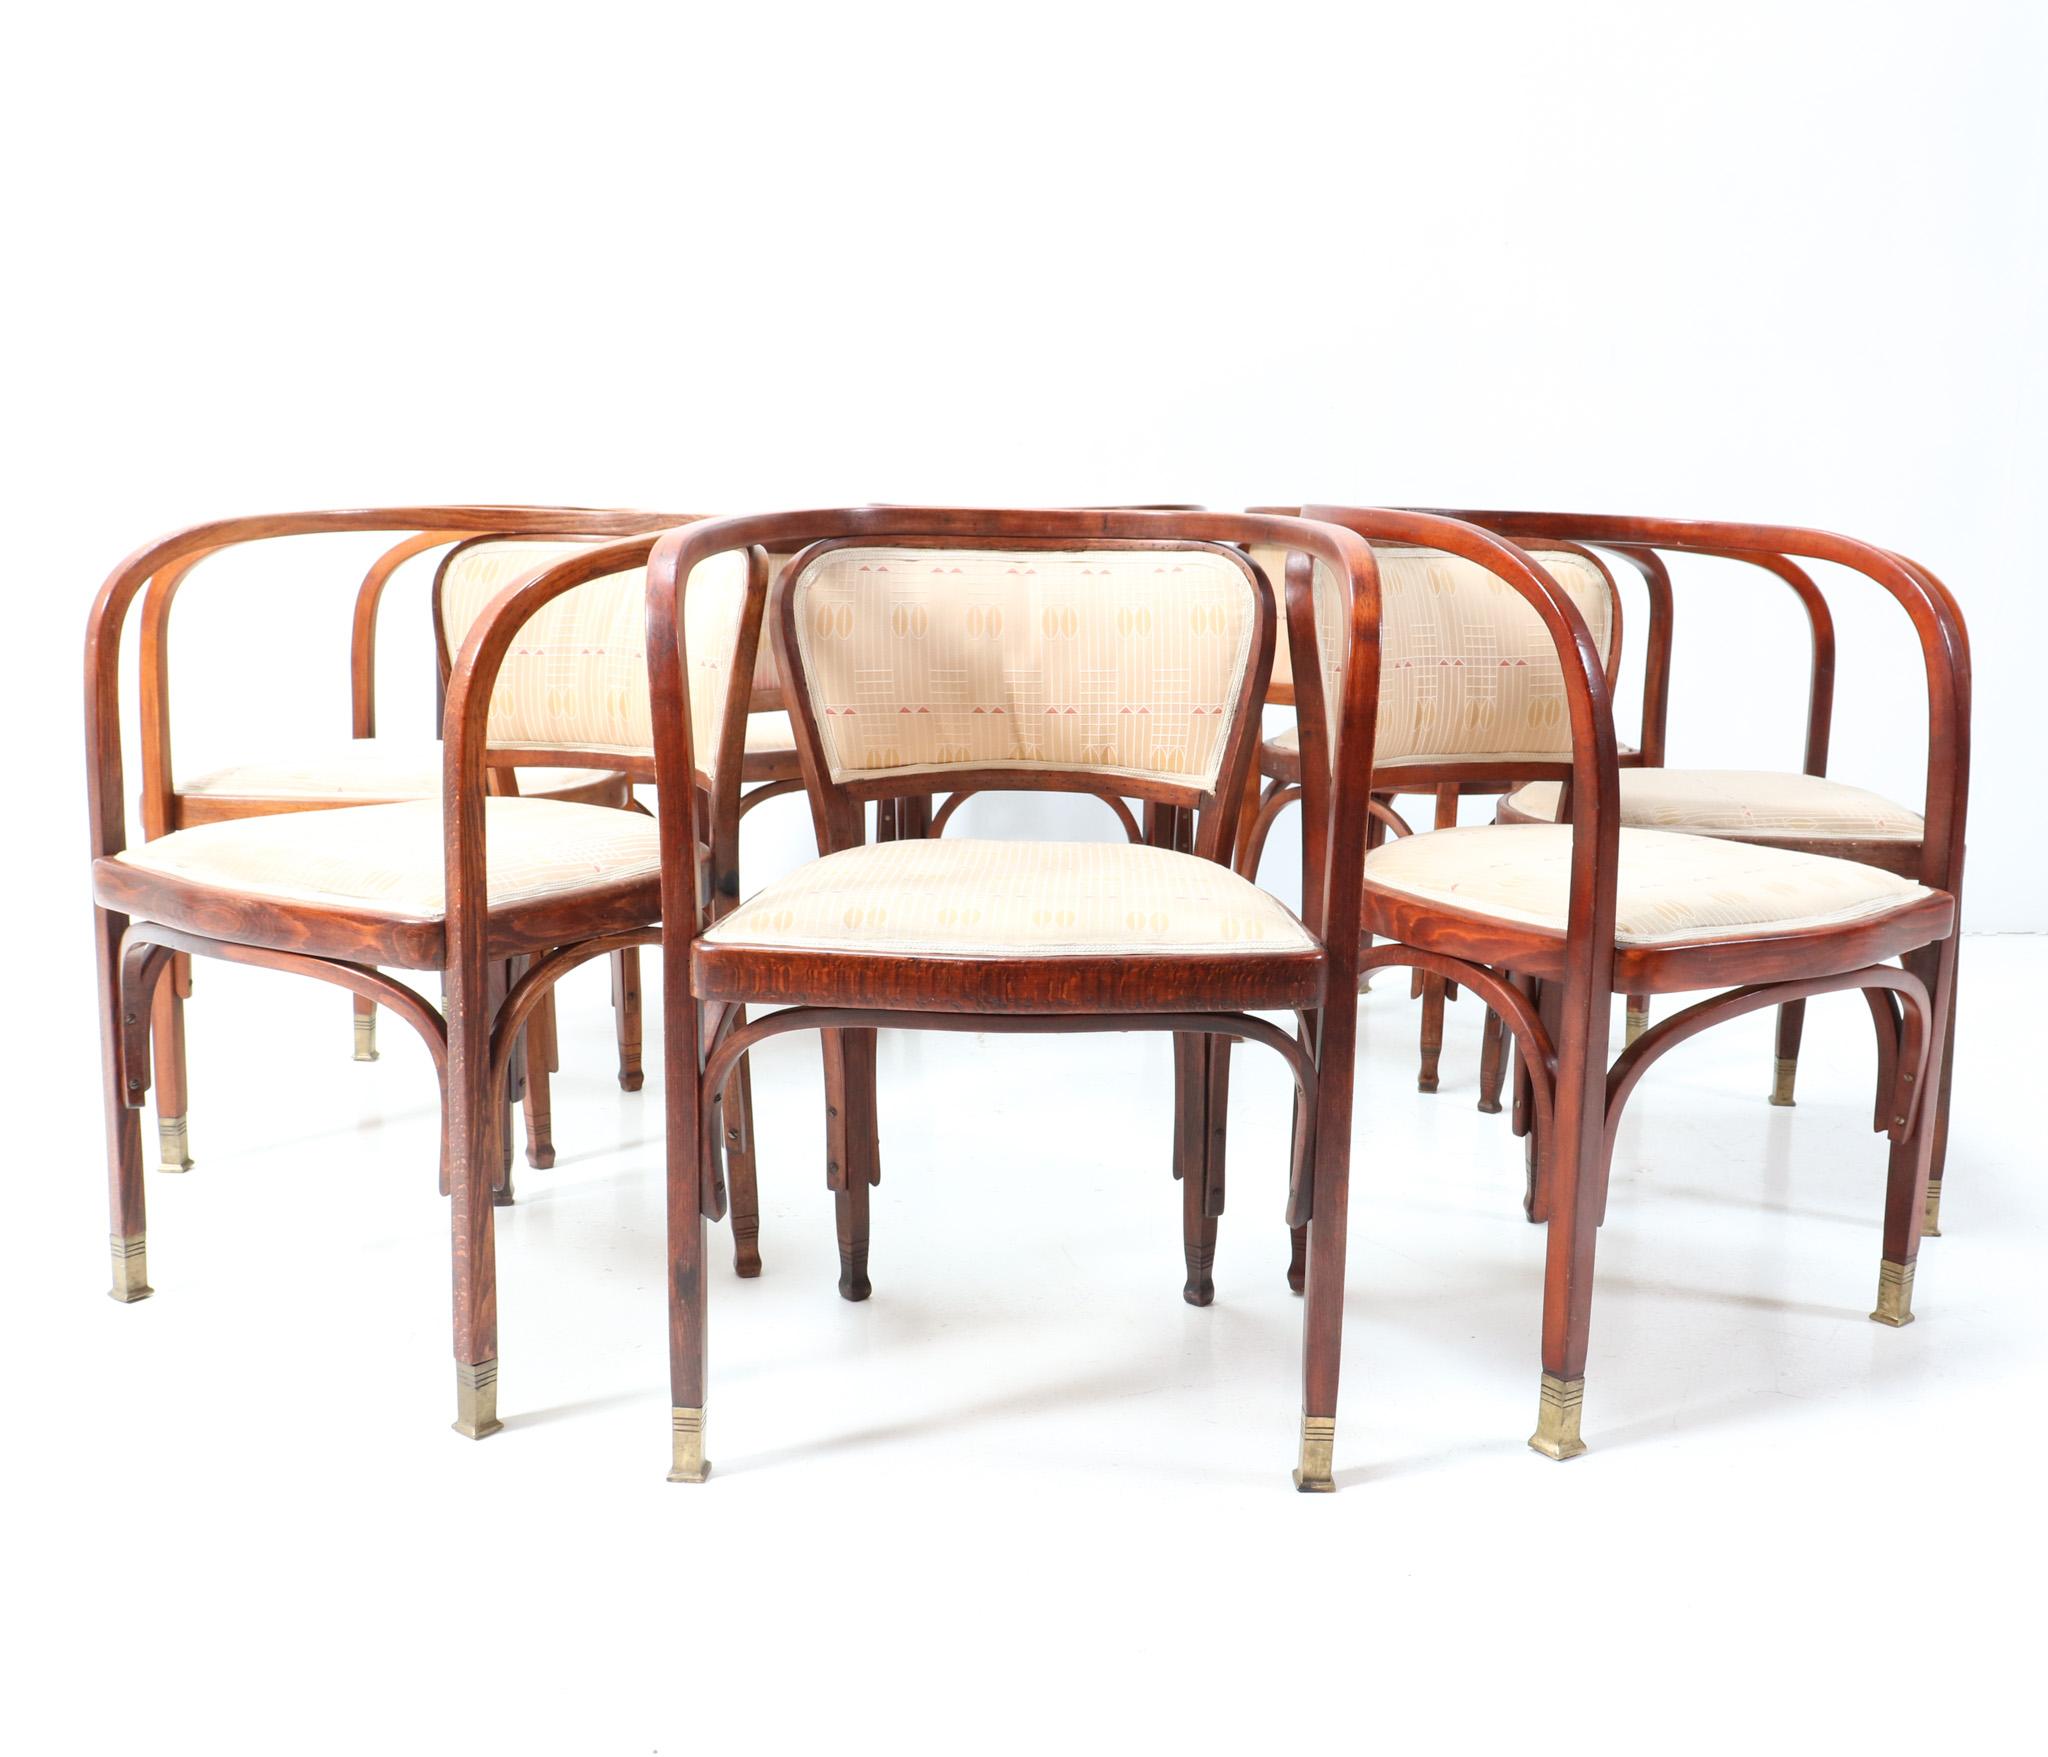 Eight Vienna Secession Armchairs by Gustav Siegel for Jacob & Josef Kohn, 1900s For Sale 1